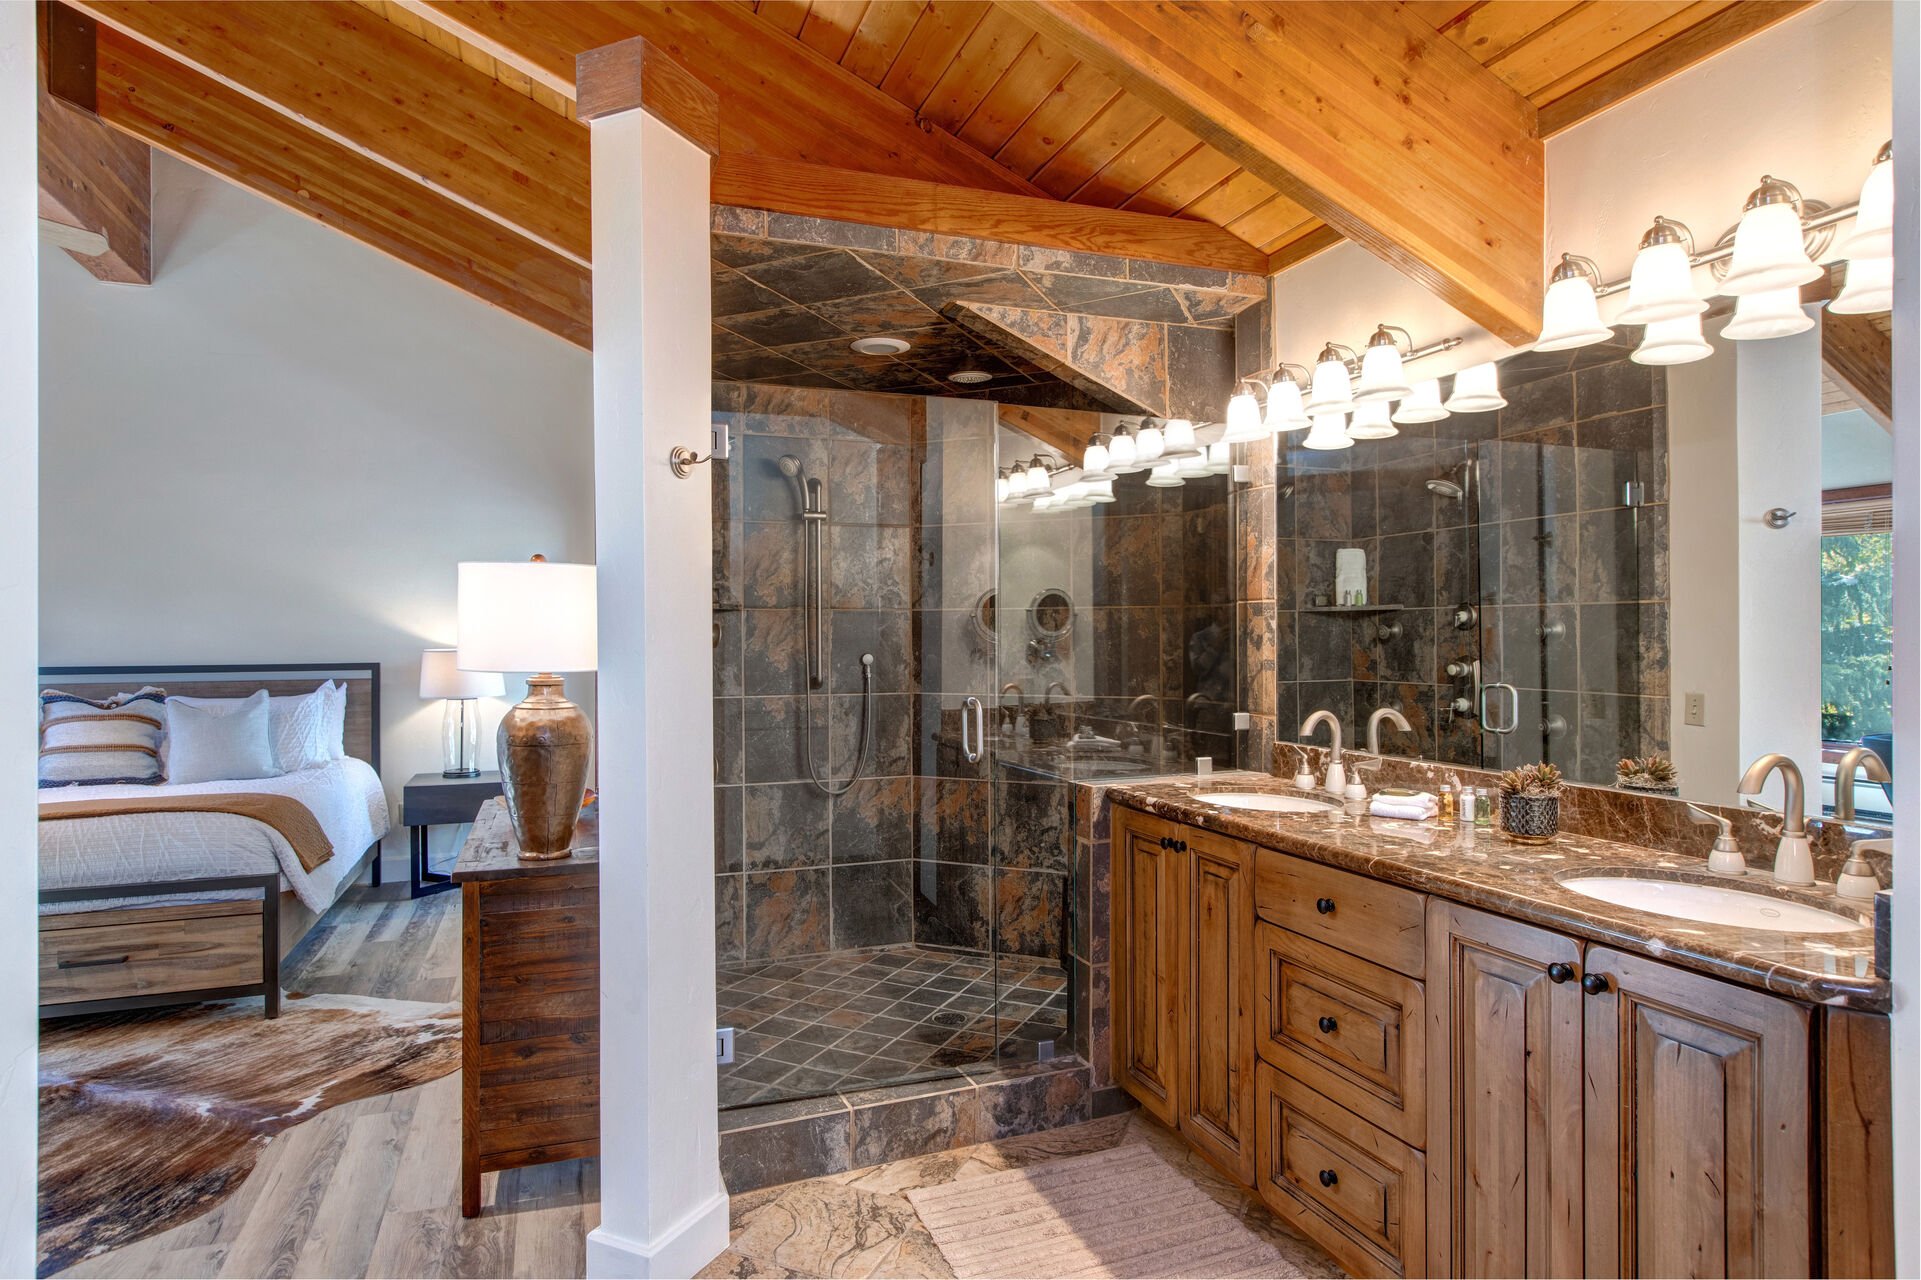 Grand Master Bathroom with dual vanities, beautiful stonework, tile & glass shower, and large jetted soaking tub